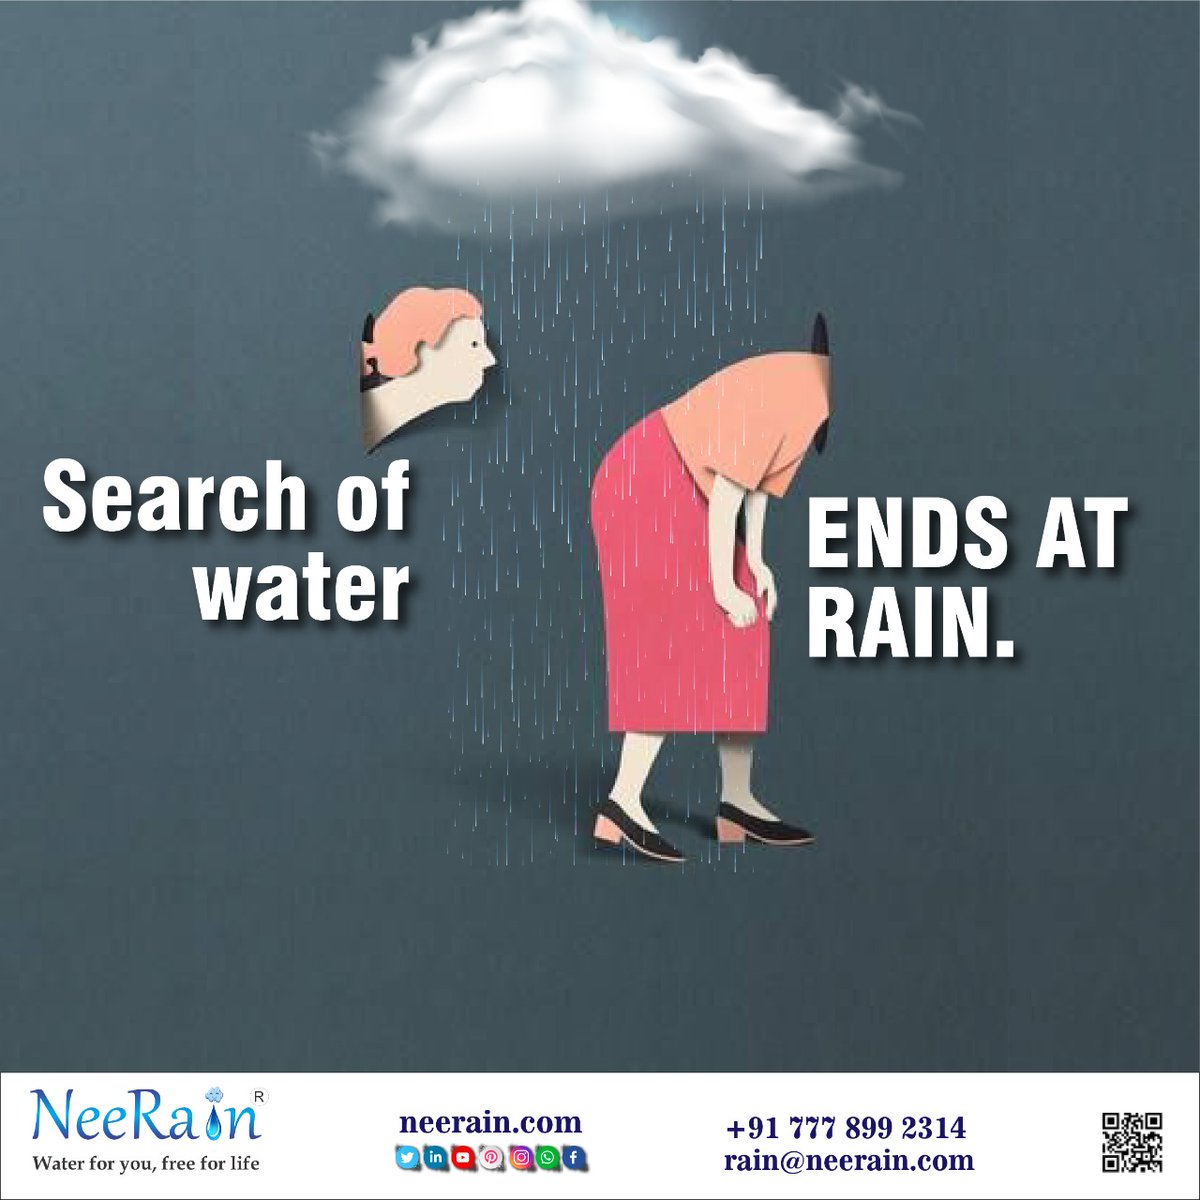 Securing water and empowering women through rooftop rainwater harvesting will transform comminities and Nation to water positive status. 
#rooftop rainwaterfilter #rainwaterfilter #neerain #janShakti4JalShakti #borewell #waterconservation #watersecurity #rainwaterharvesting